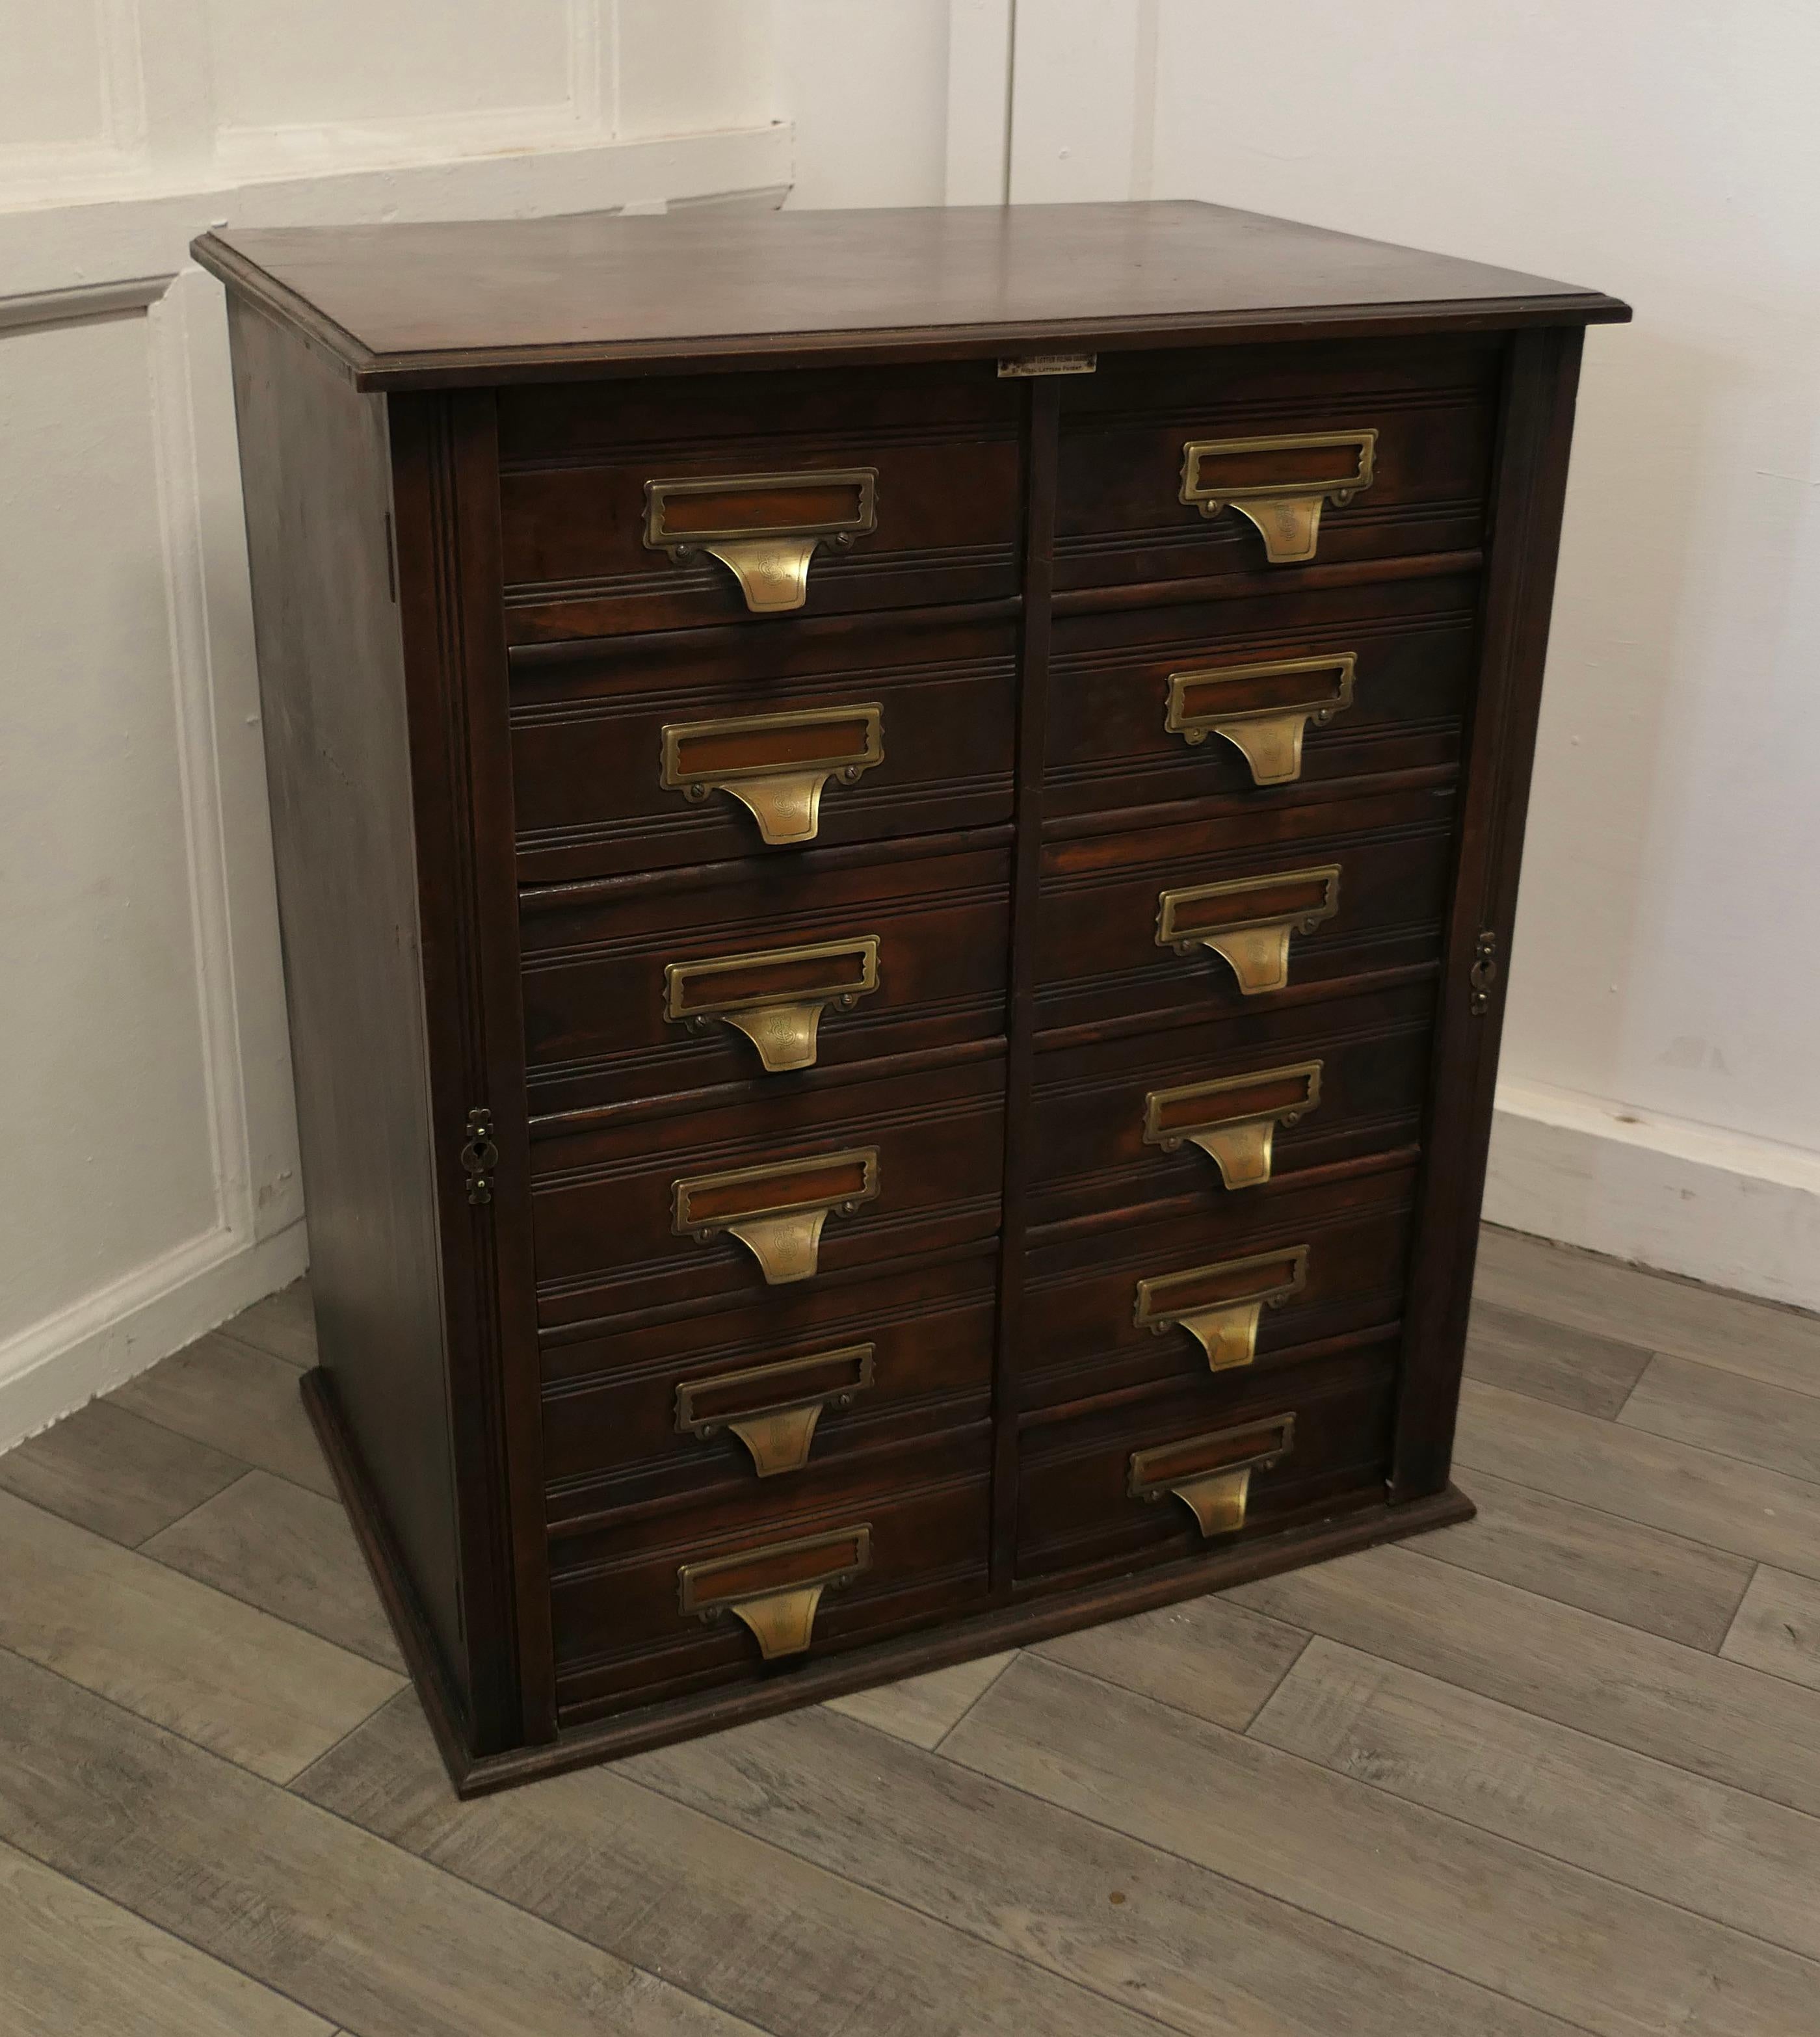 Barristers Wellington filing cabinet by Shannon.

This unusual filing cabinet is made by Shannon, recognised for the quality of their filing systems, the cabinet has 12 drop file drawers, and locking flaps at each side, these have locks but we do